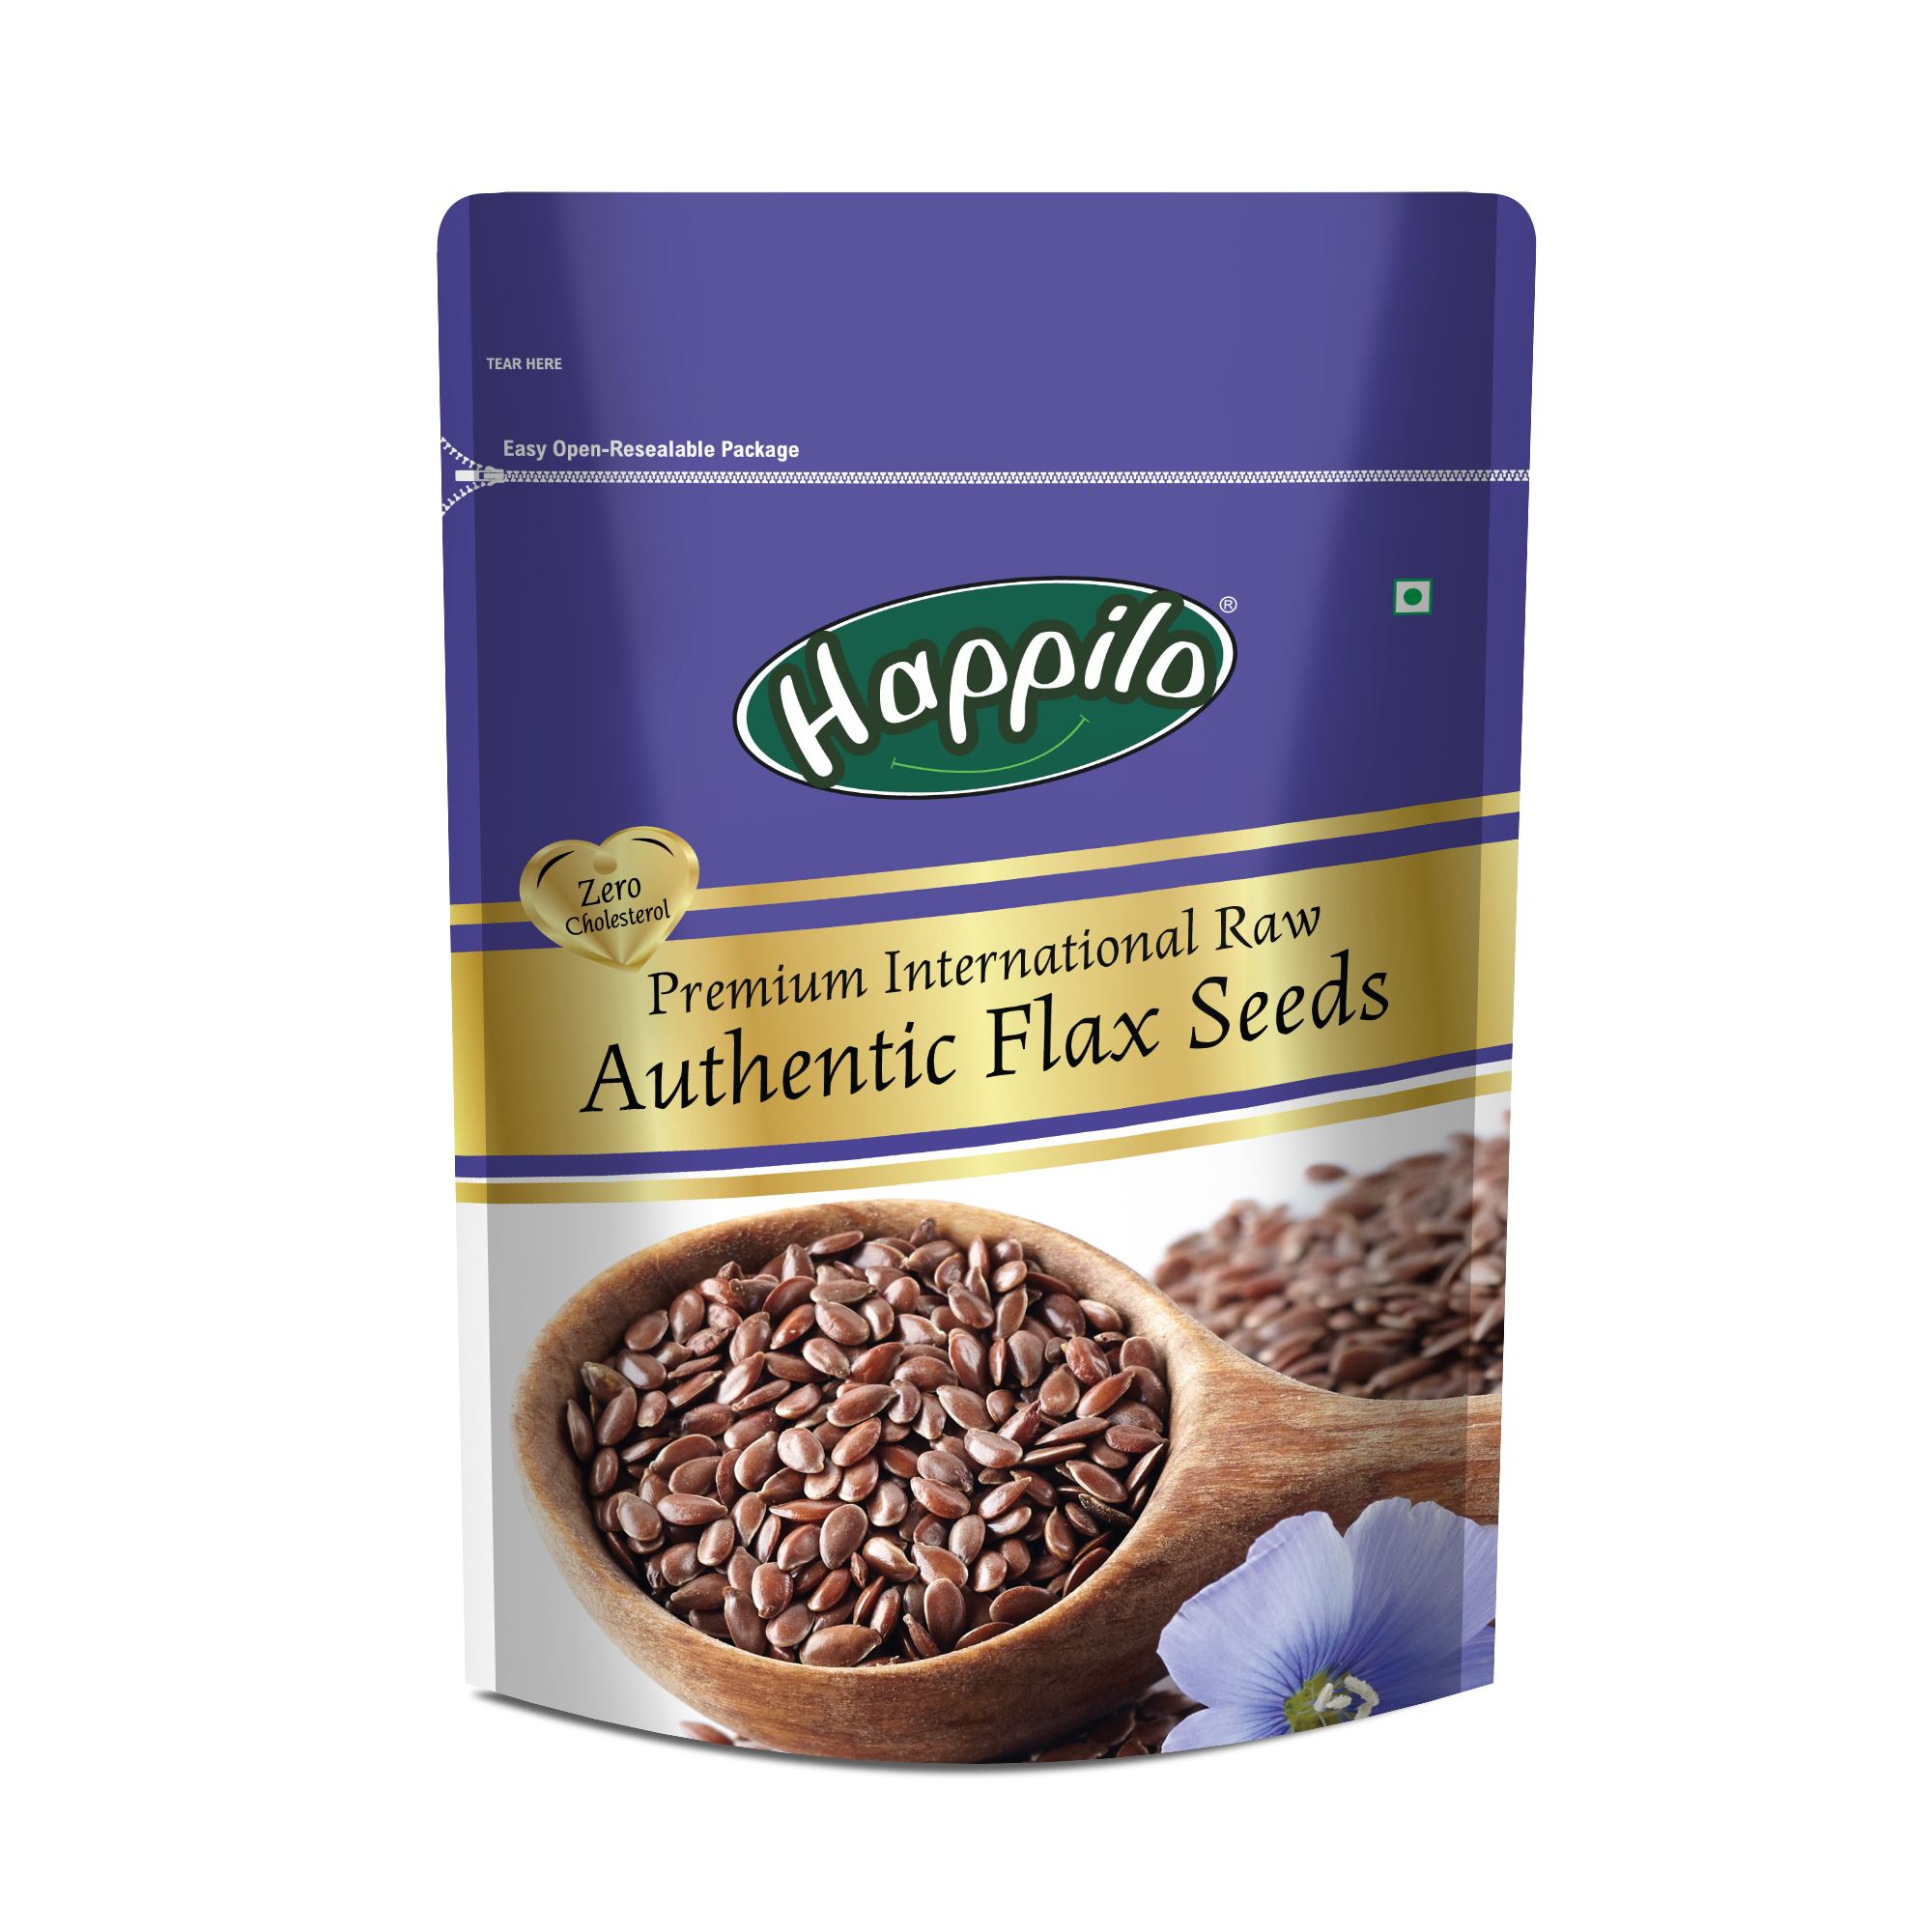 Nutritious Raw Flax Seeds